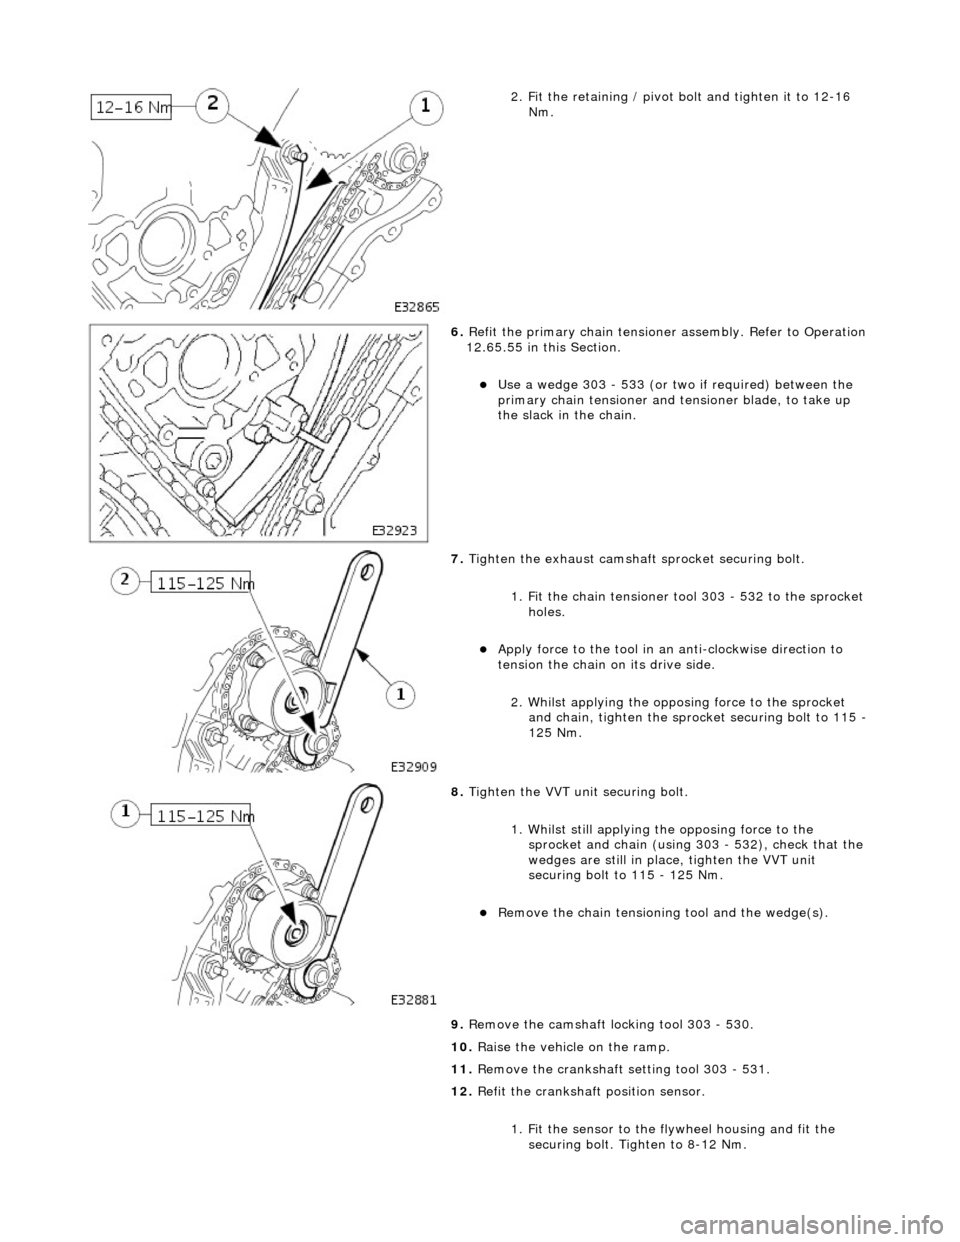 JAGUAR X308 1998 2.G Workshop Manual  
2. Fit the retaining / pivot bolt and tighten it to 12-16 Nm. 
 
6.  Refit the primary chain tensione r assembly. Refer to Operation 
12.65.55 in this Section. 
Use a wedge 303 - 533 (or two if r